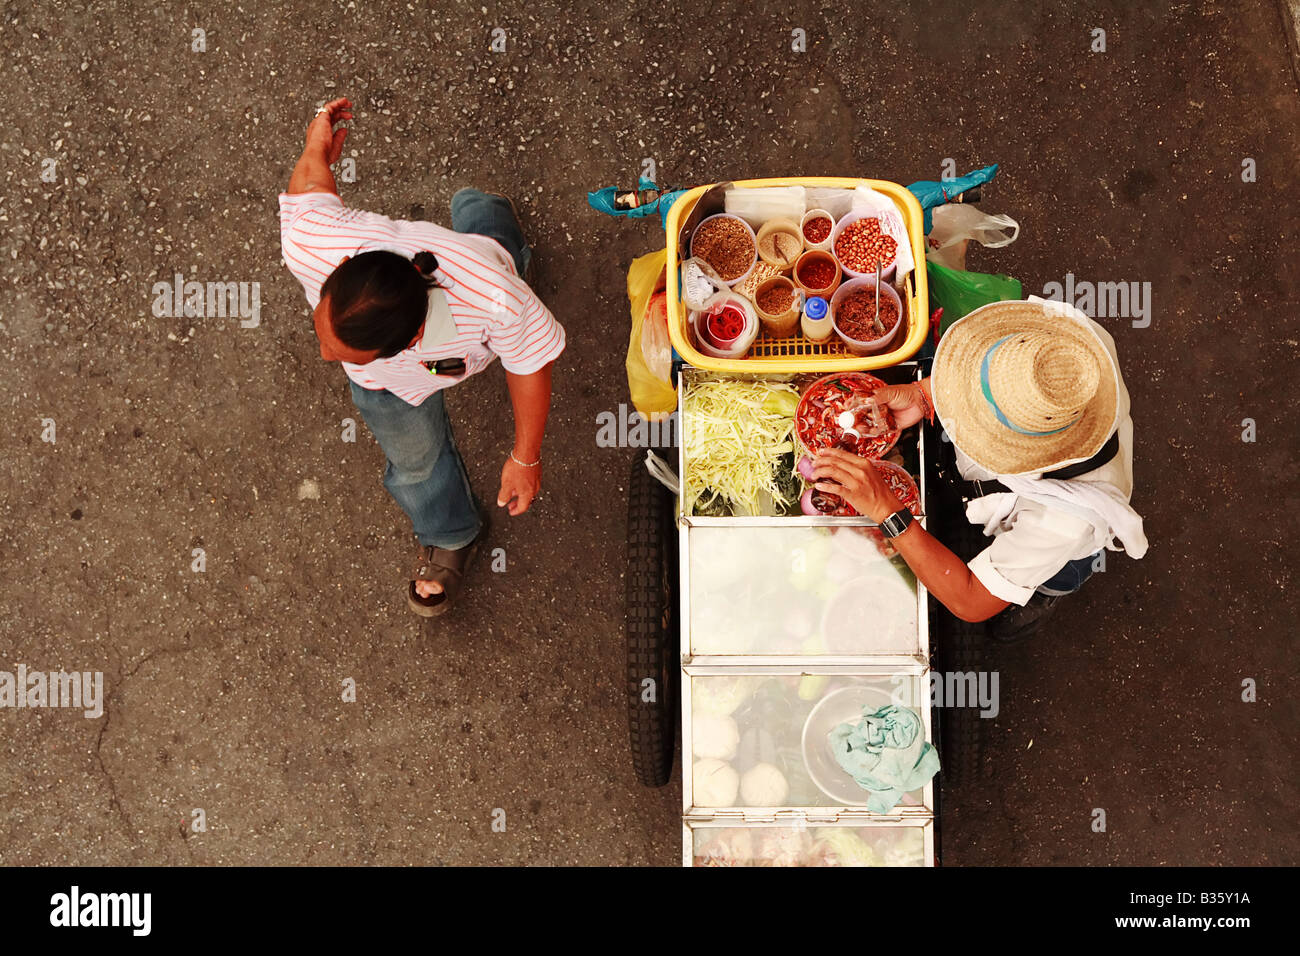 Street food is food obtainable from a streetside vendor, often from a makeshift or portable stall. Stock Photo